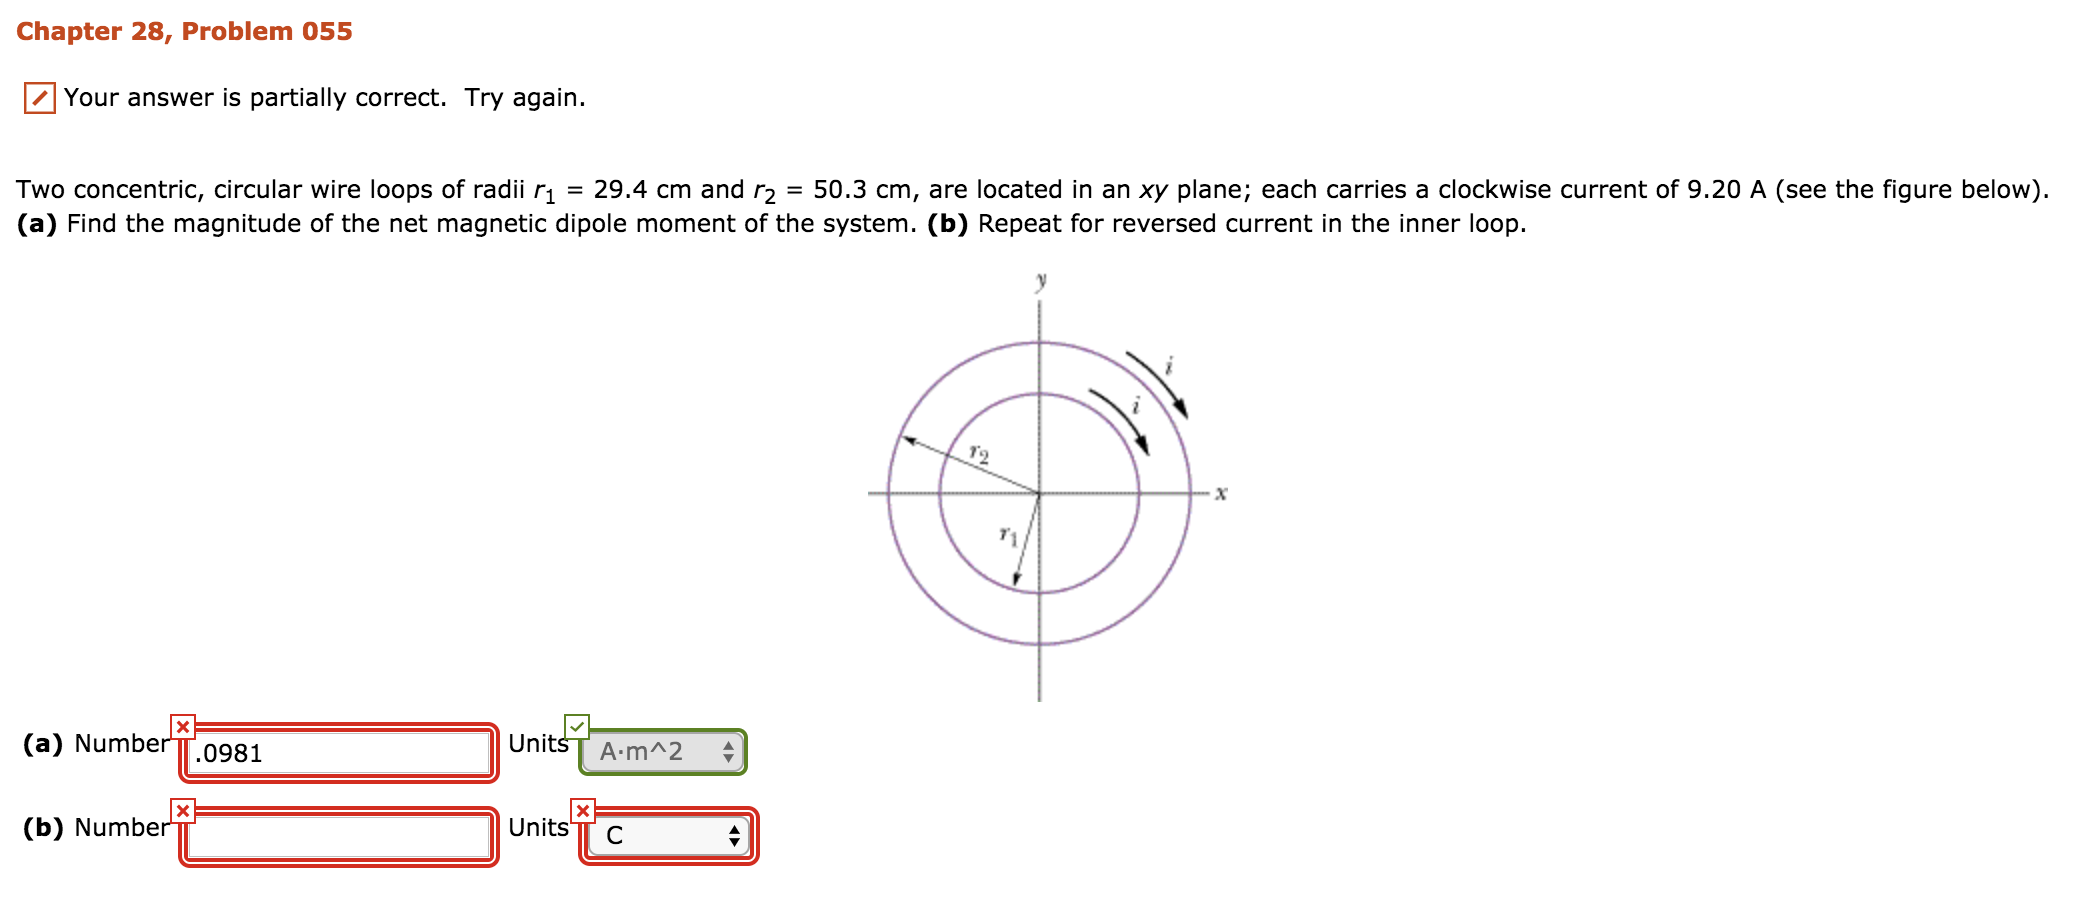 Chapter 28, Problem 055
Your answer is partially correct. Try again.
Two concentric, circular wire loops of radii r1 = 29.4 cm and r2 = 50.3 cm, are located in an xy plane; each carries a clockwise current of 9.20 A (see the figure below)
(a) Find the magnitude of the net magnetic dipole moment of the system. (b) Repeat for reversed current in the inner loop
Unitss A.mA2
(a) Number TT.0981
Units TT C
(b) Number
